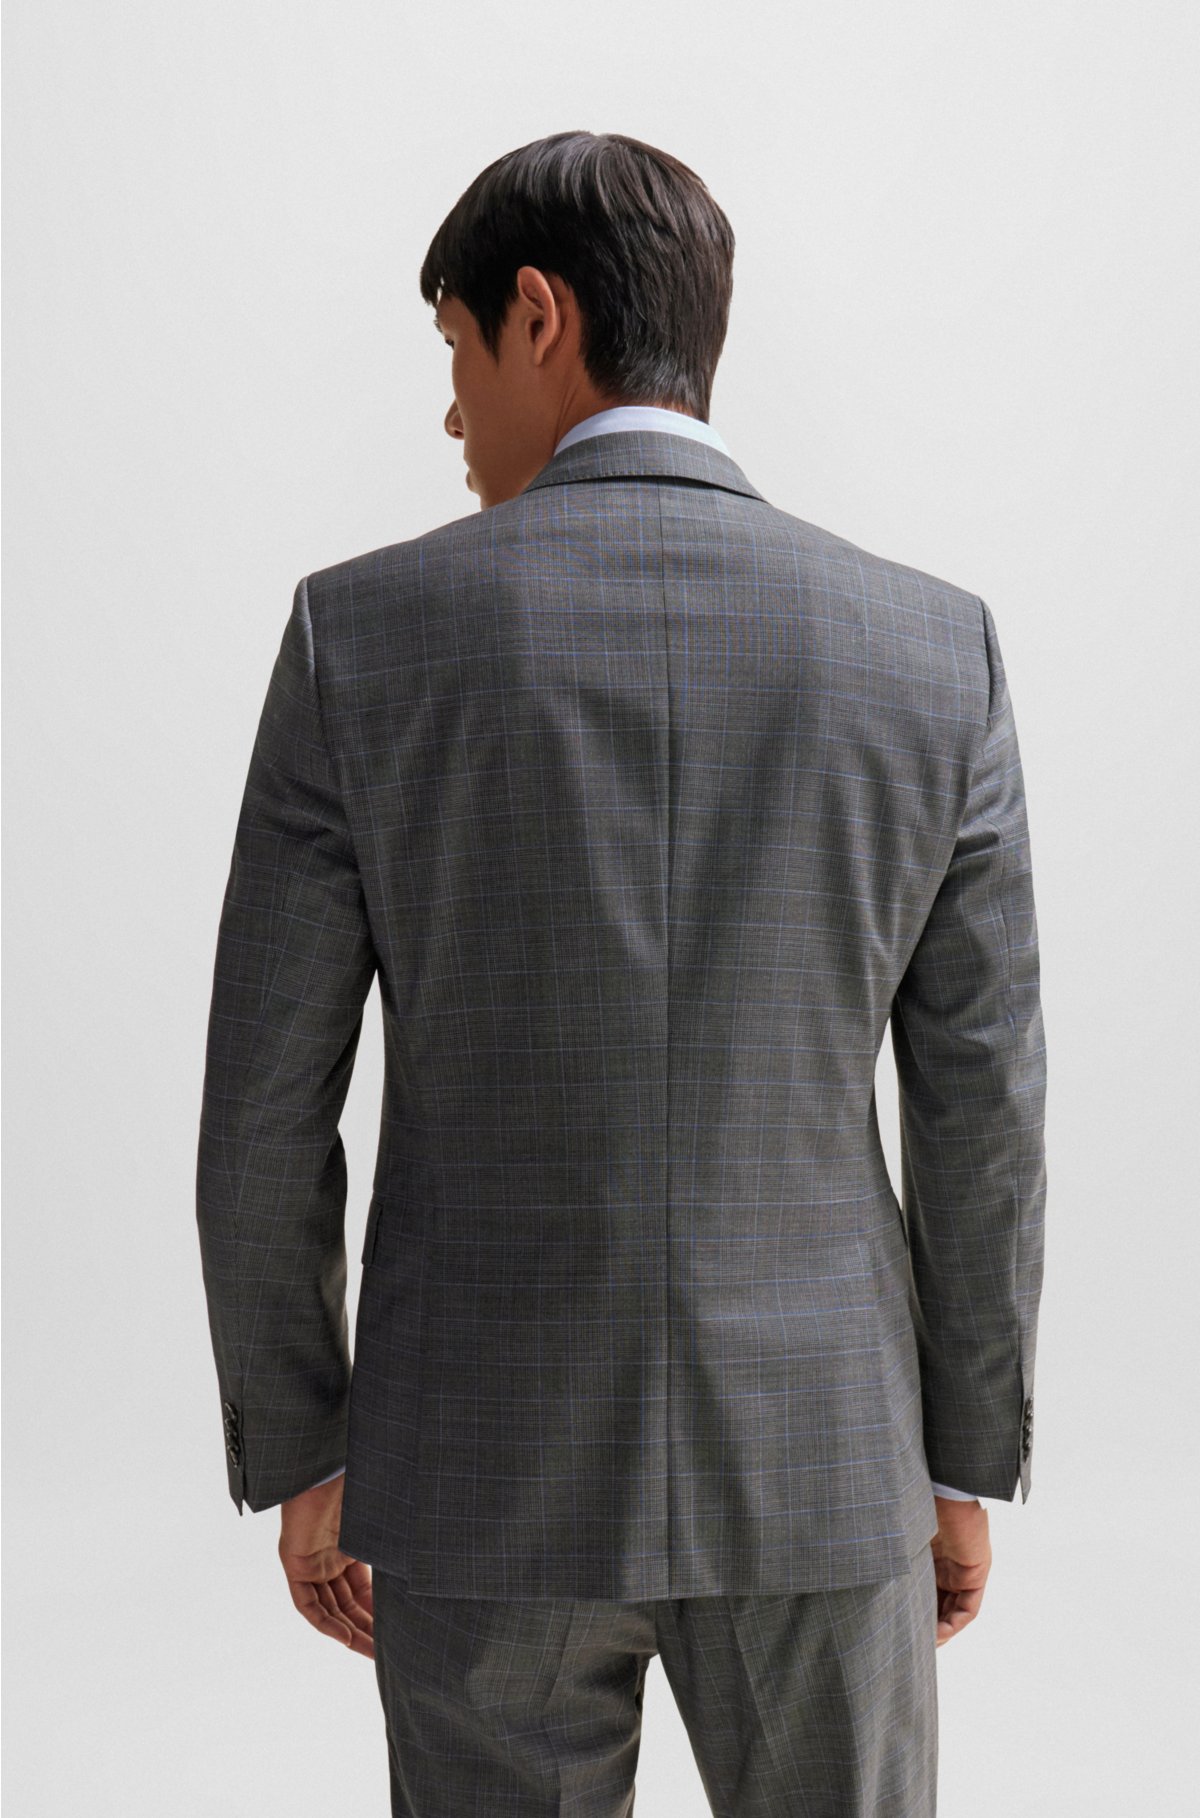 BOSS - Slim-fit suit in checked stretch wool